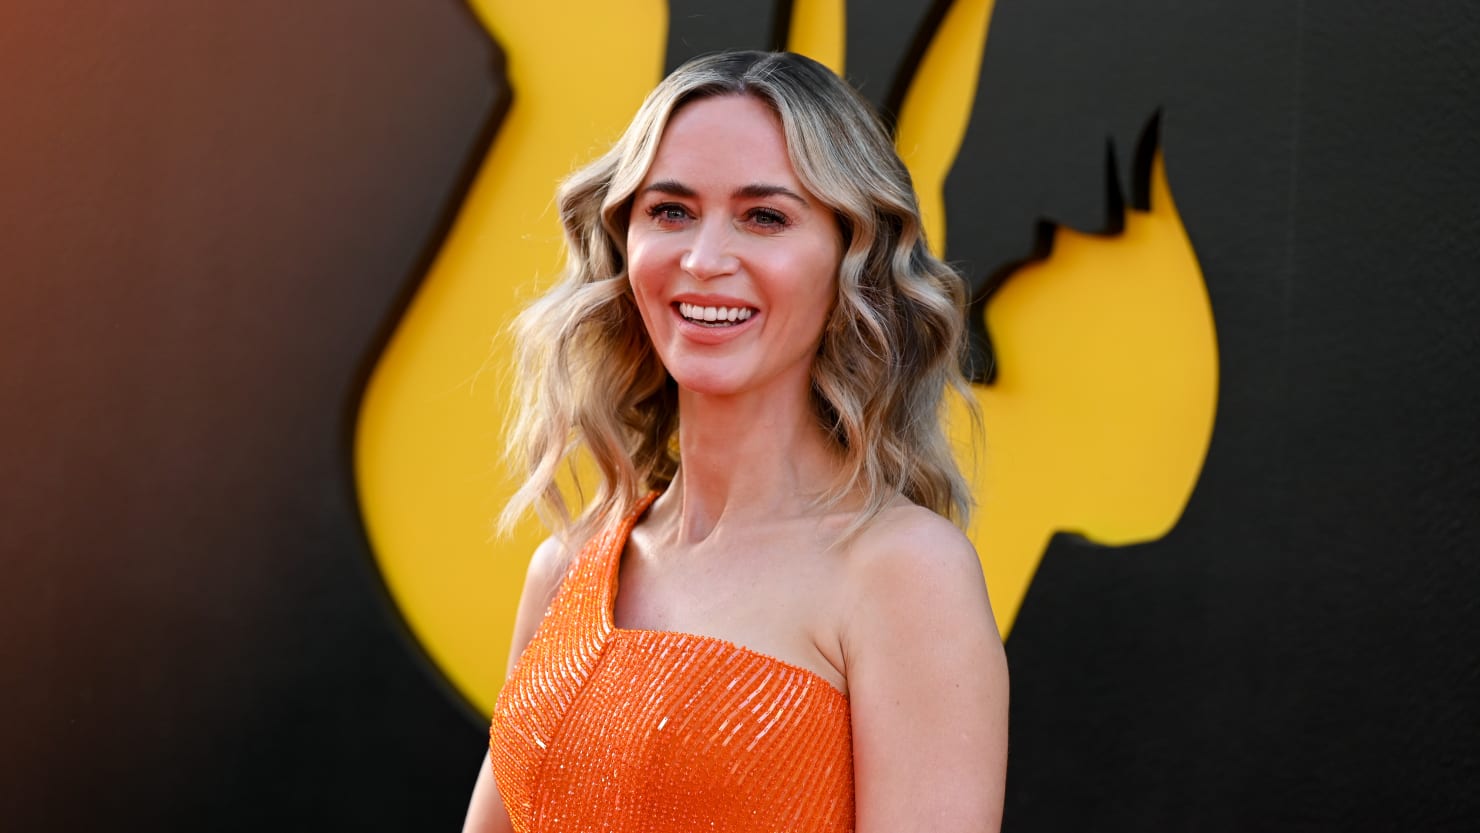 Emily Blunt Was Grossed Out by Kissing Certain Co-Stars on Camera